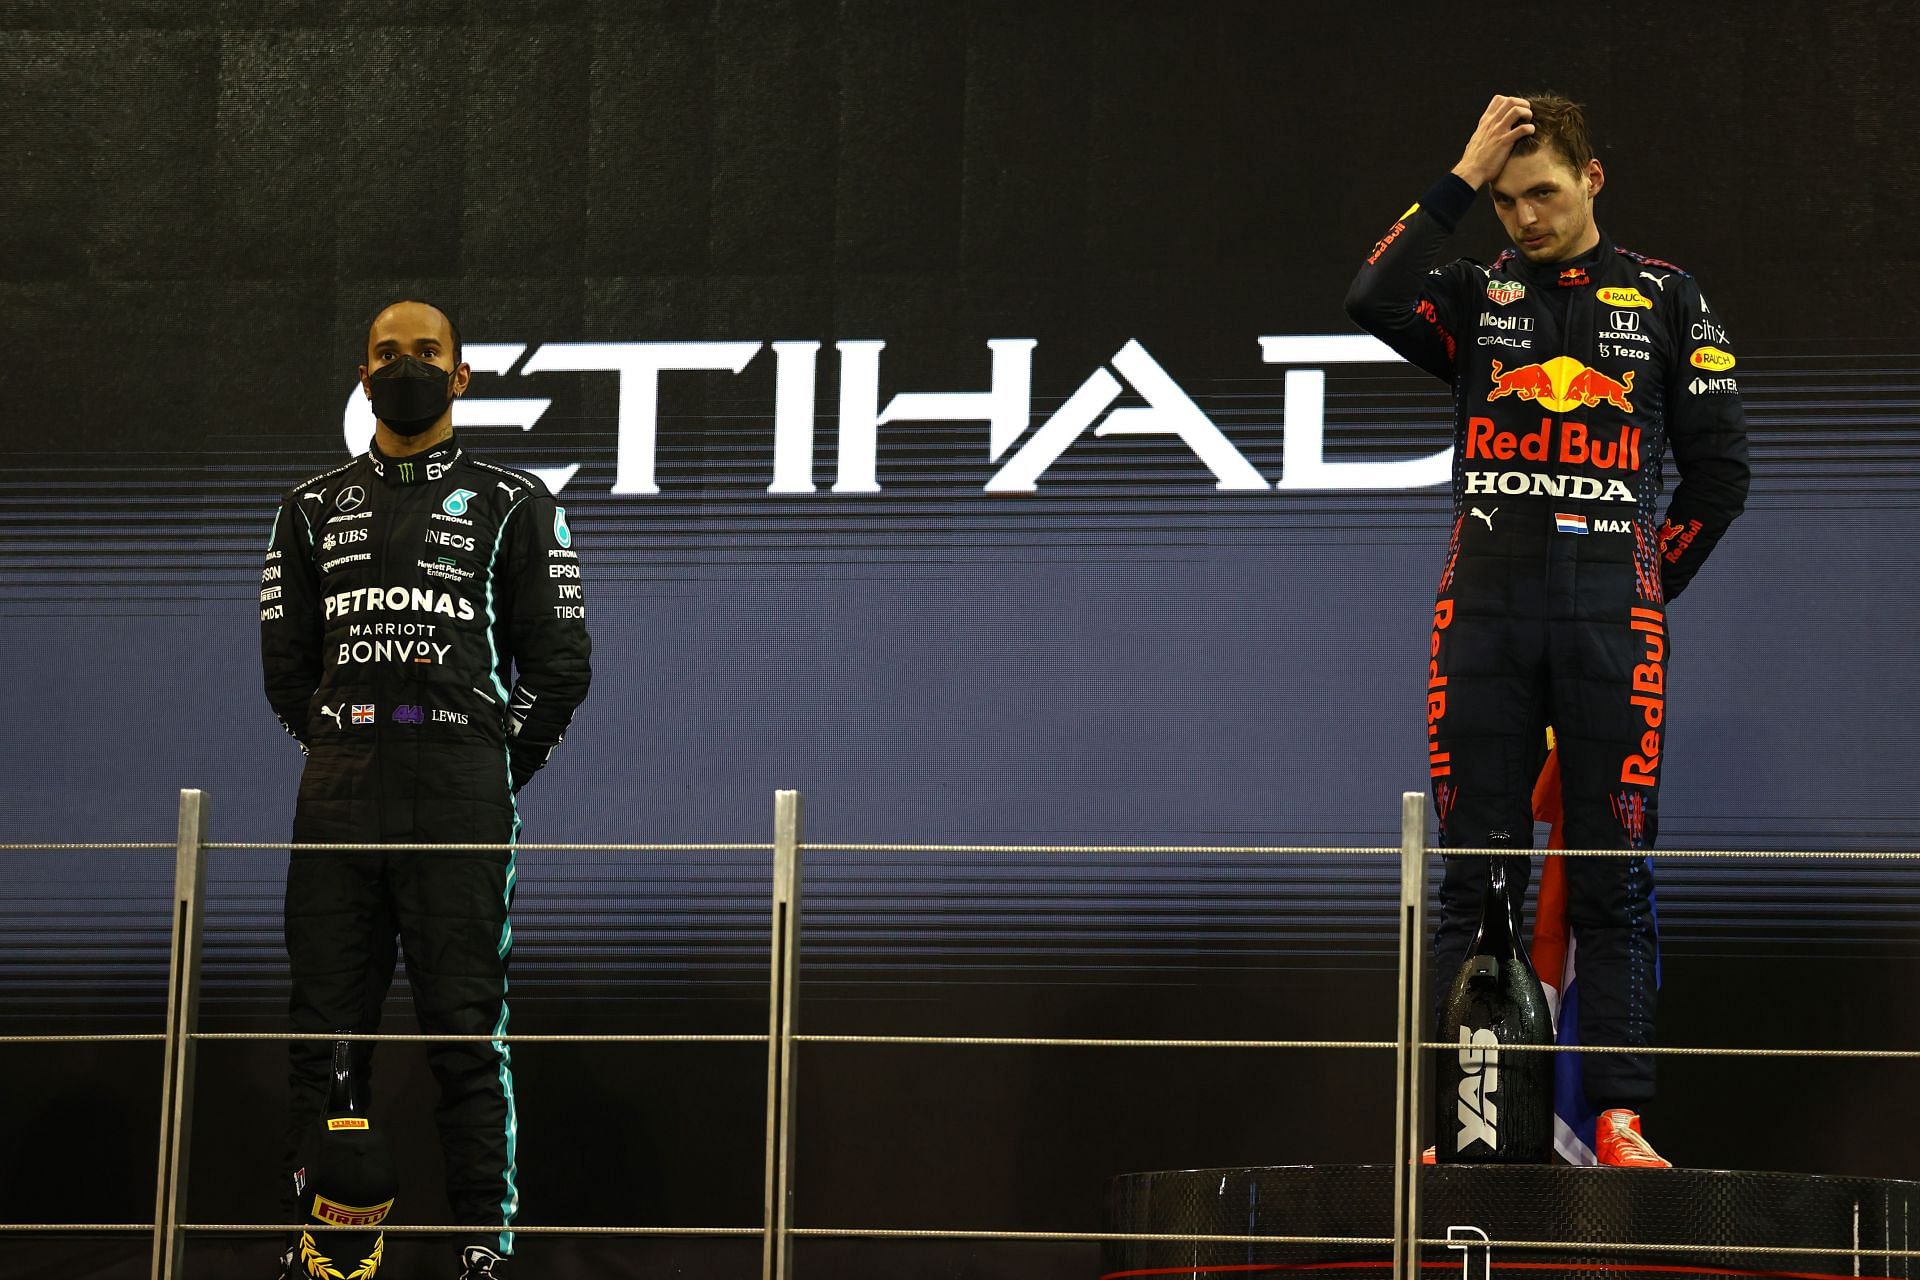 Race winner and 2021 F1 World Drivers Champion Max Verstappen with second-placed Lewis Hamilton on the podium during 2021 Abu Dhabi GP. (Photo by Bryn Lennon/Getty Images)